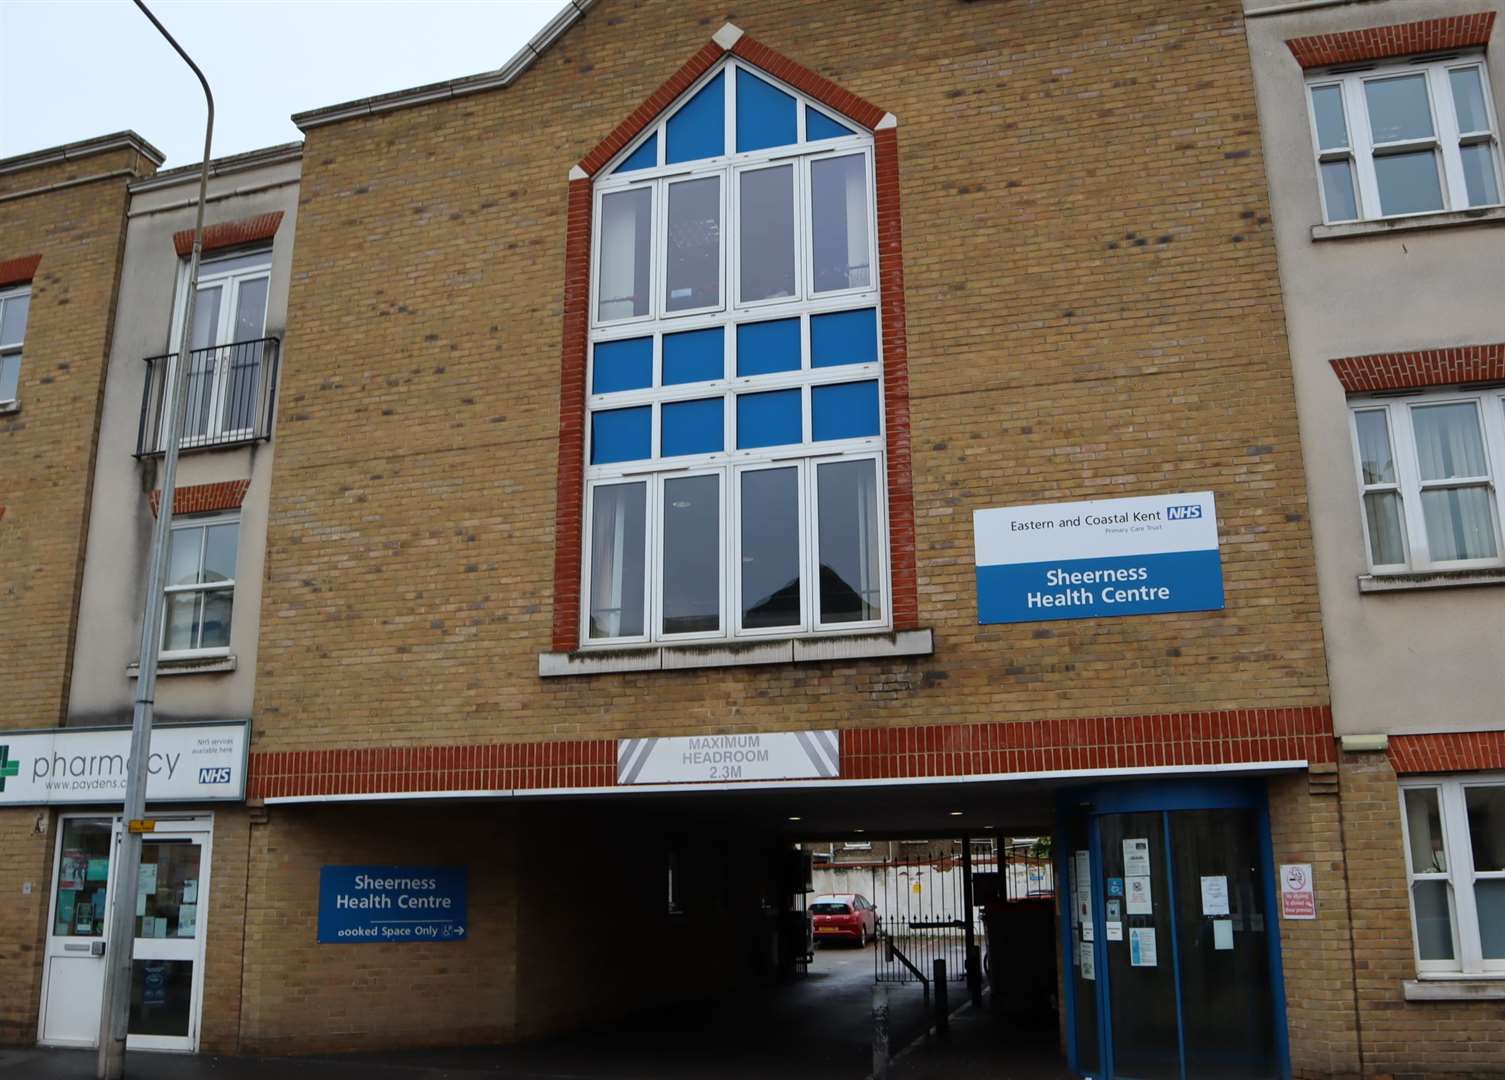 Vaccines are being delivered by the Sheerness Health Centre but there is no GP-led vaccine programme in Sittingbourne yet